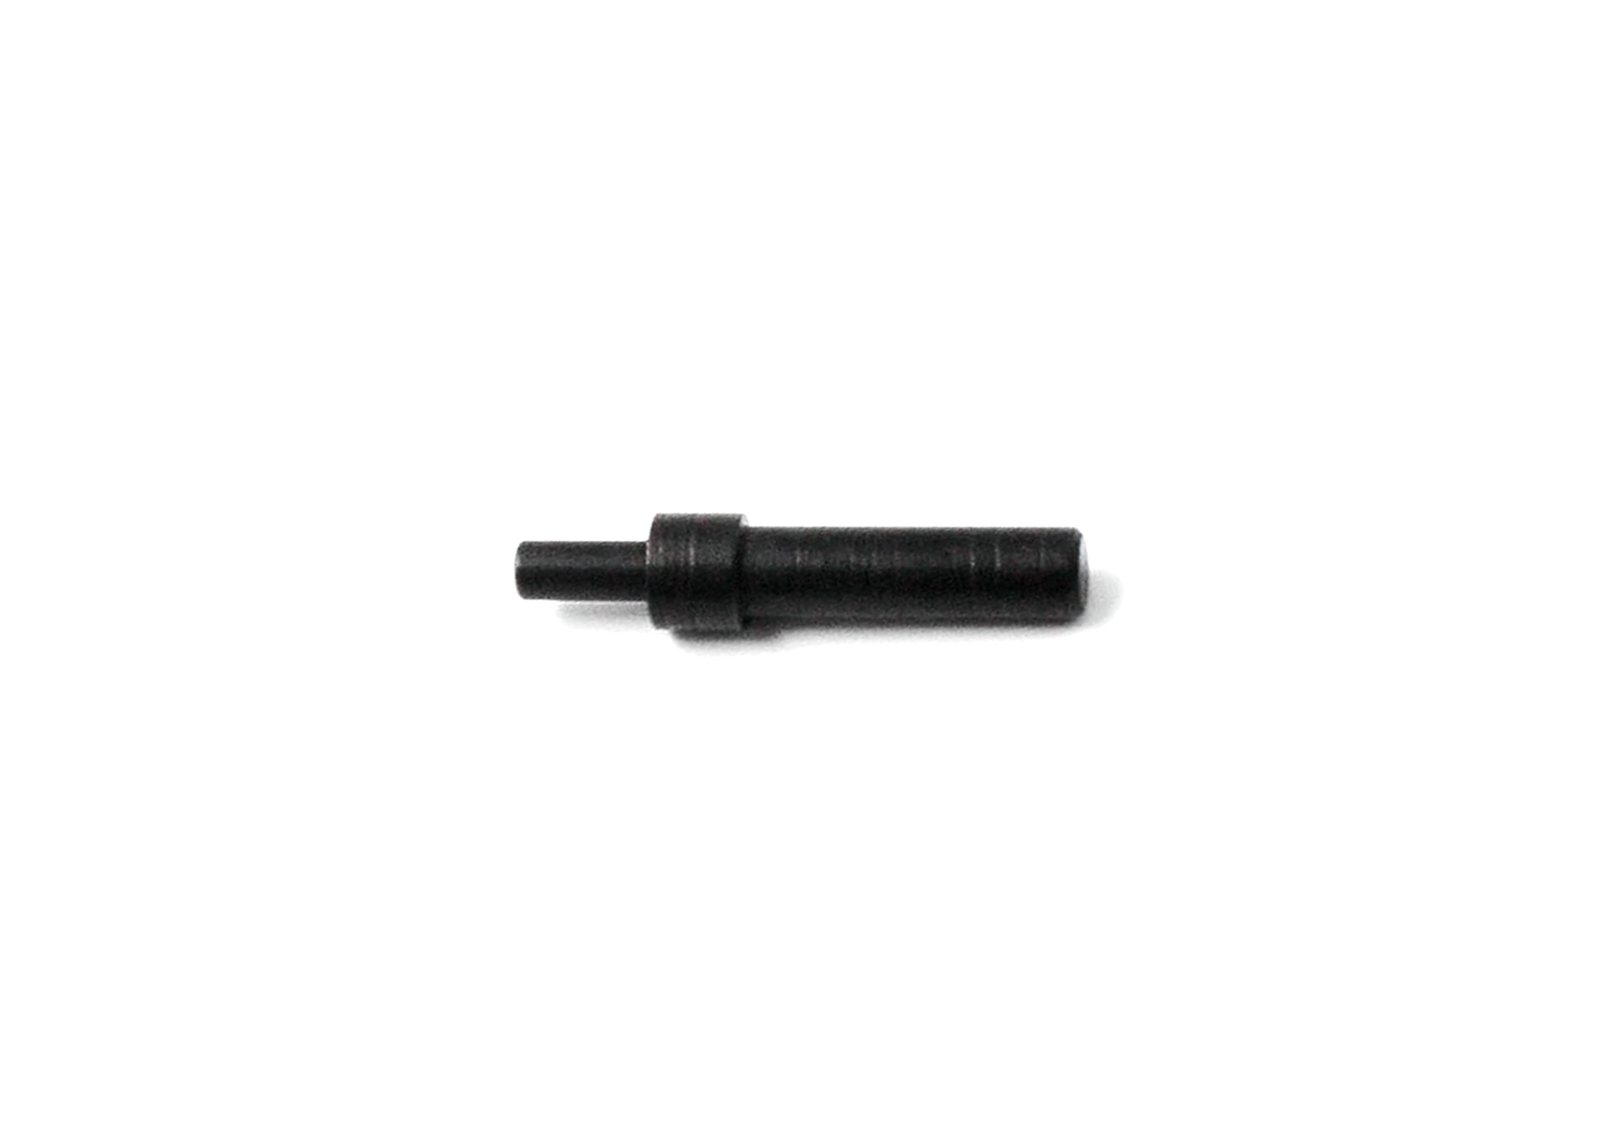 Enhanced Firing Pin for Western Arms .45 Series - Modify Airsoft